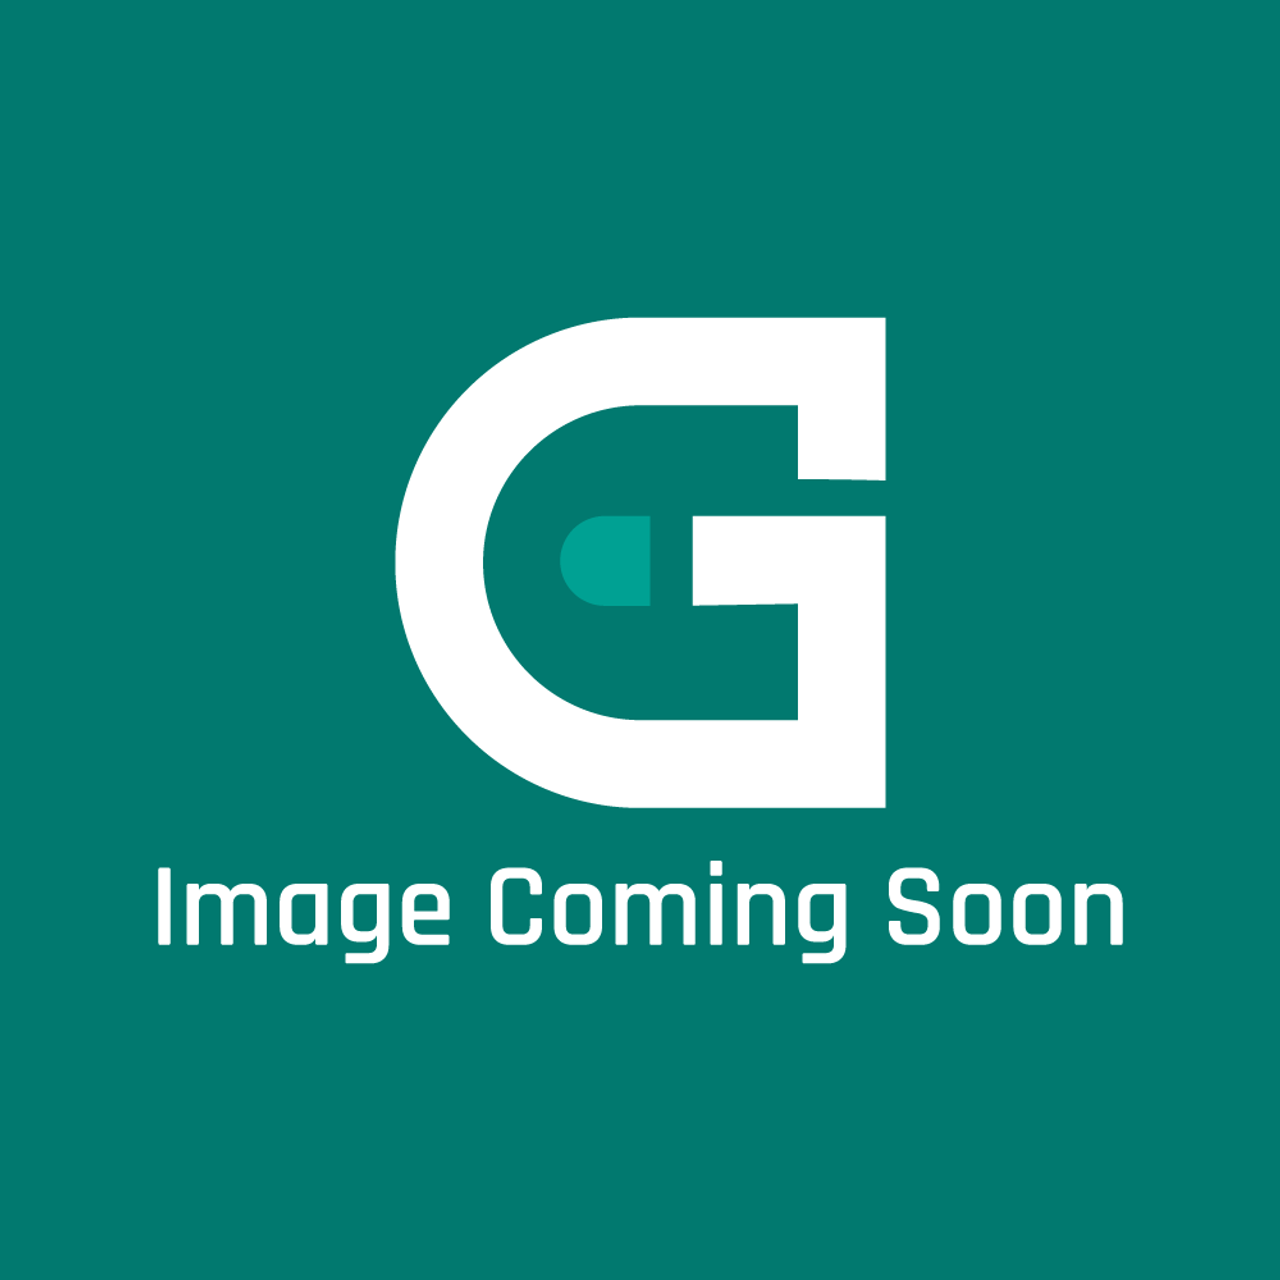 Frigidaire - Electrolux 242106201 Gate - Image Coming Soon!